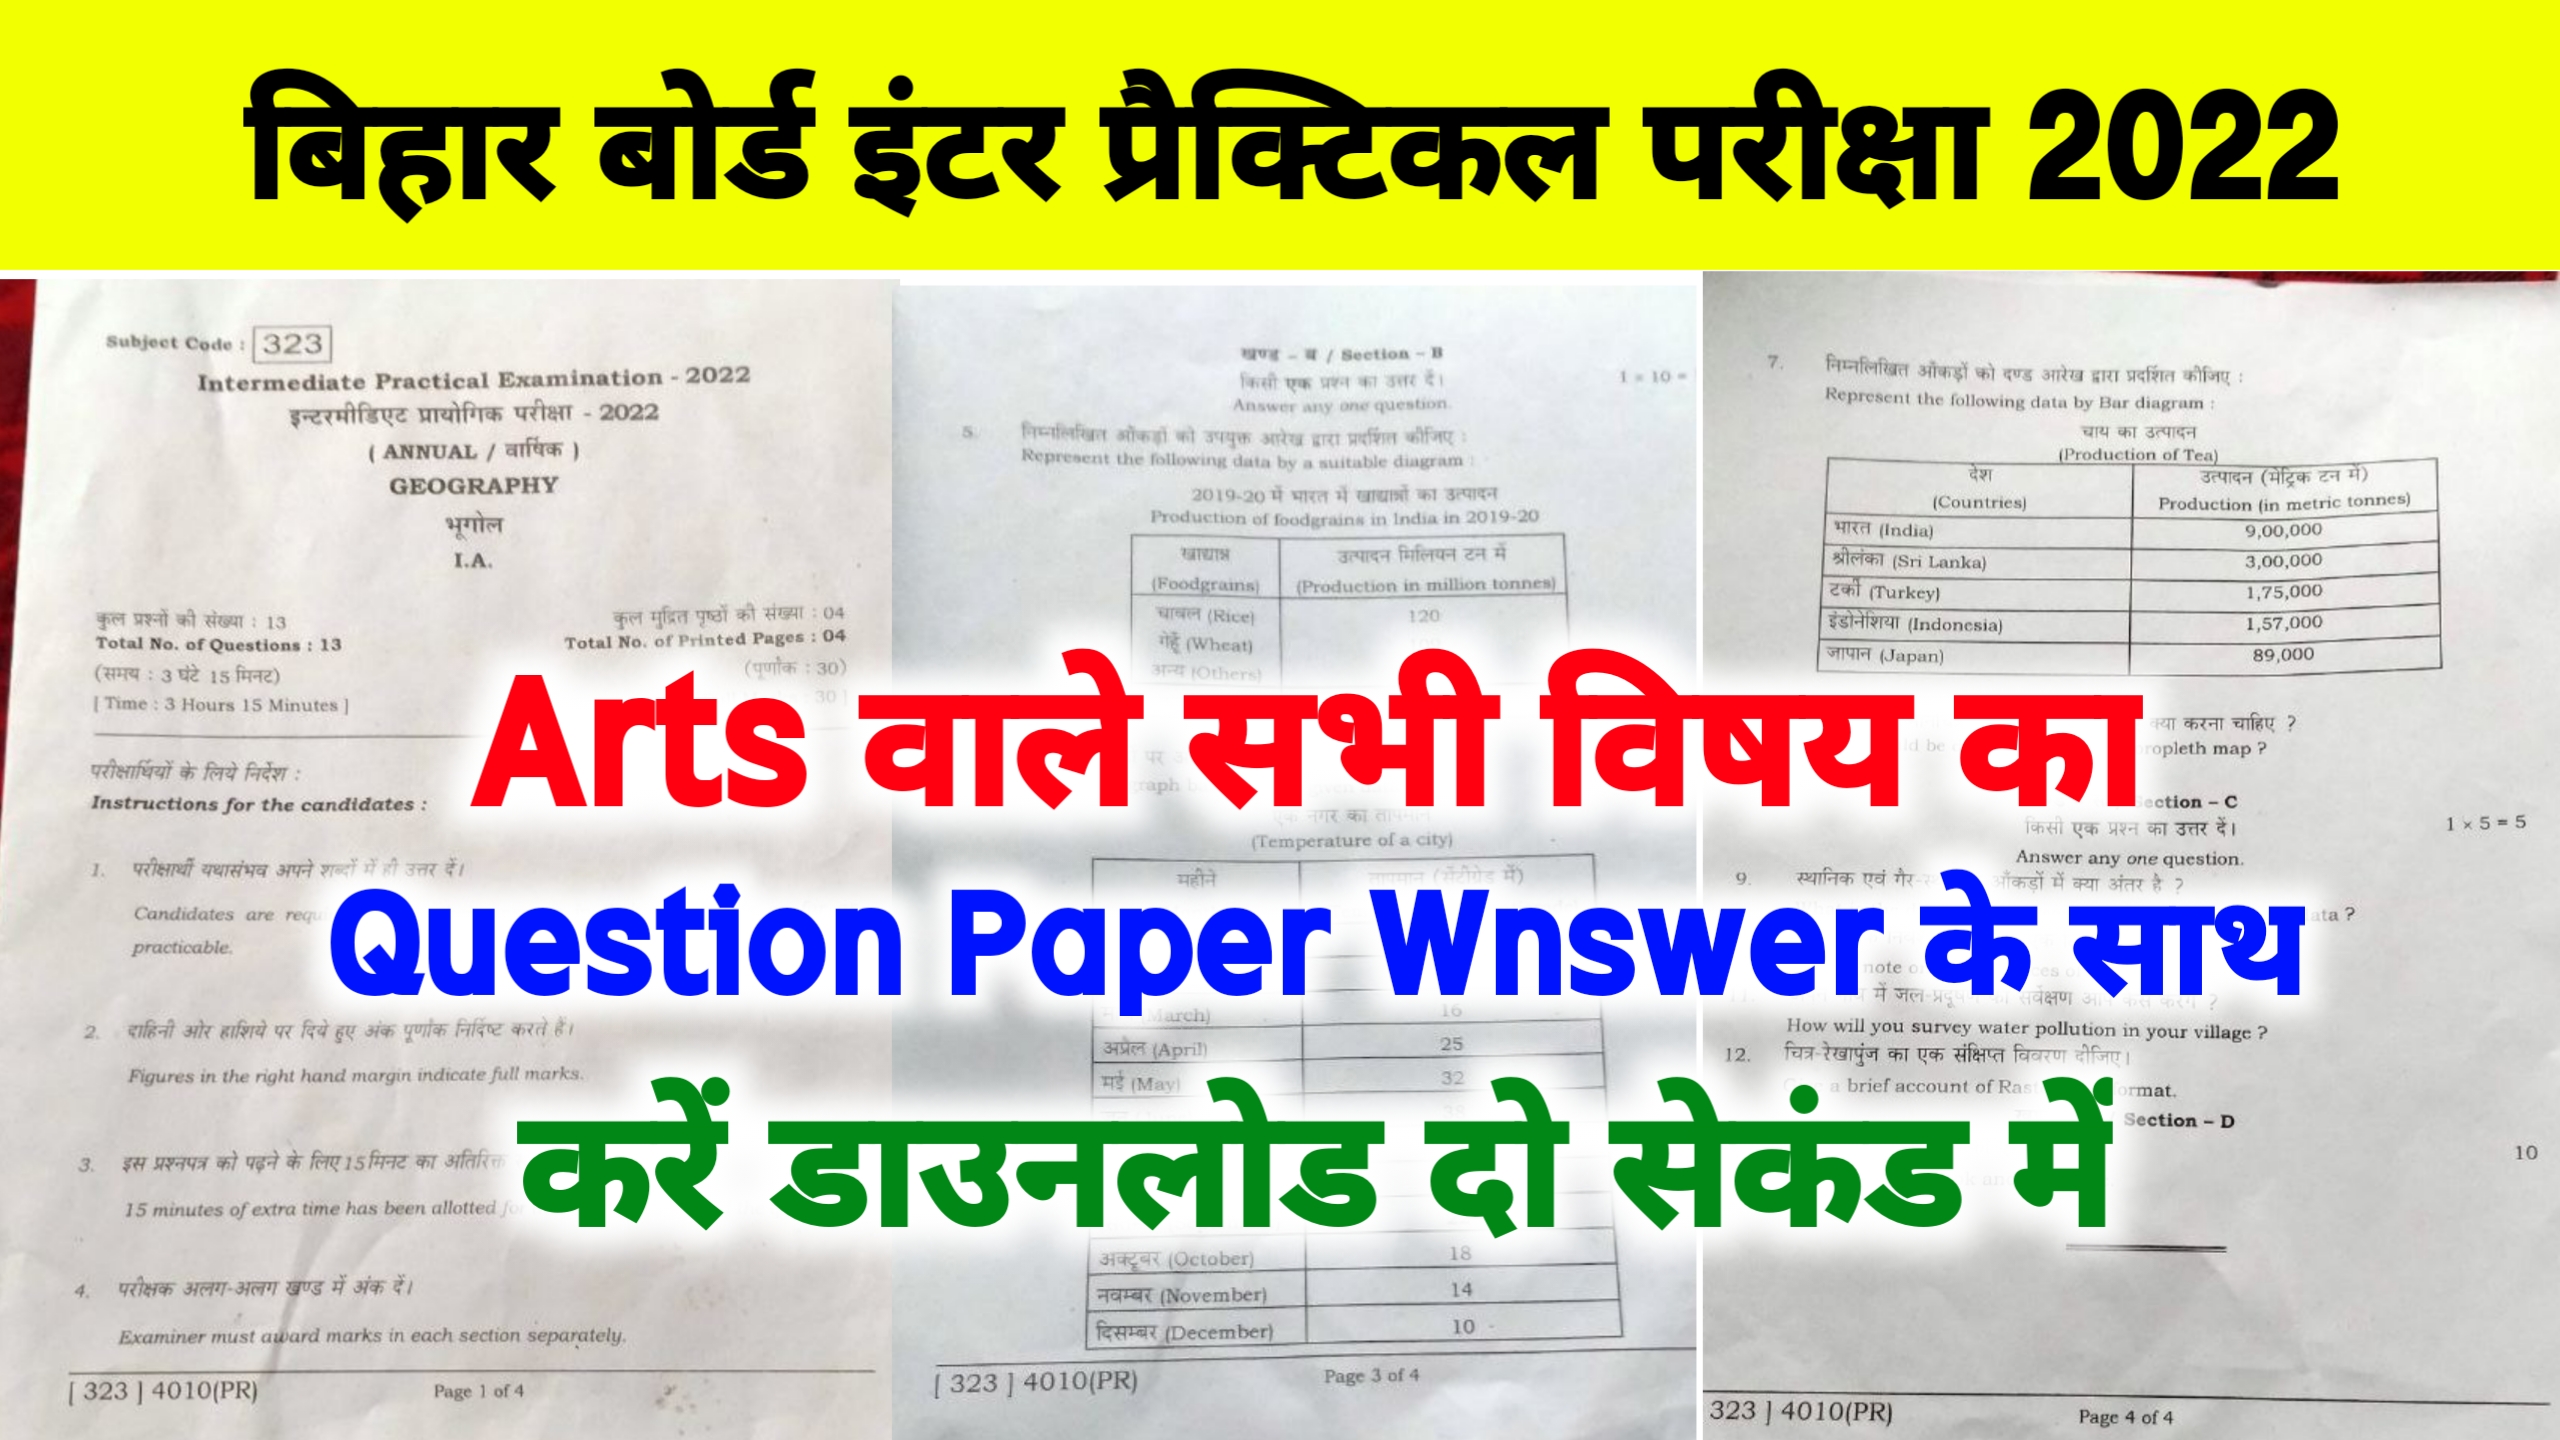 Bihar Board 12th Arts Practical Exam Question Paper 2022 ; Inter Question Viral With Answer Sheet